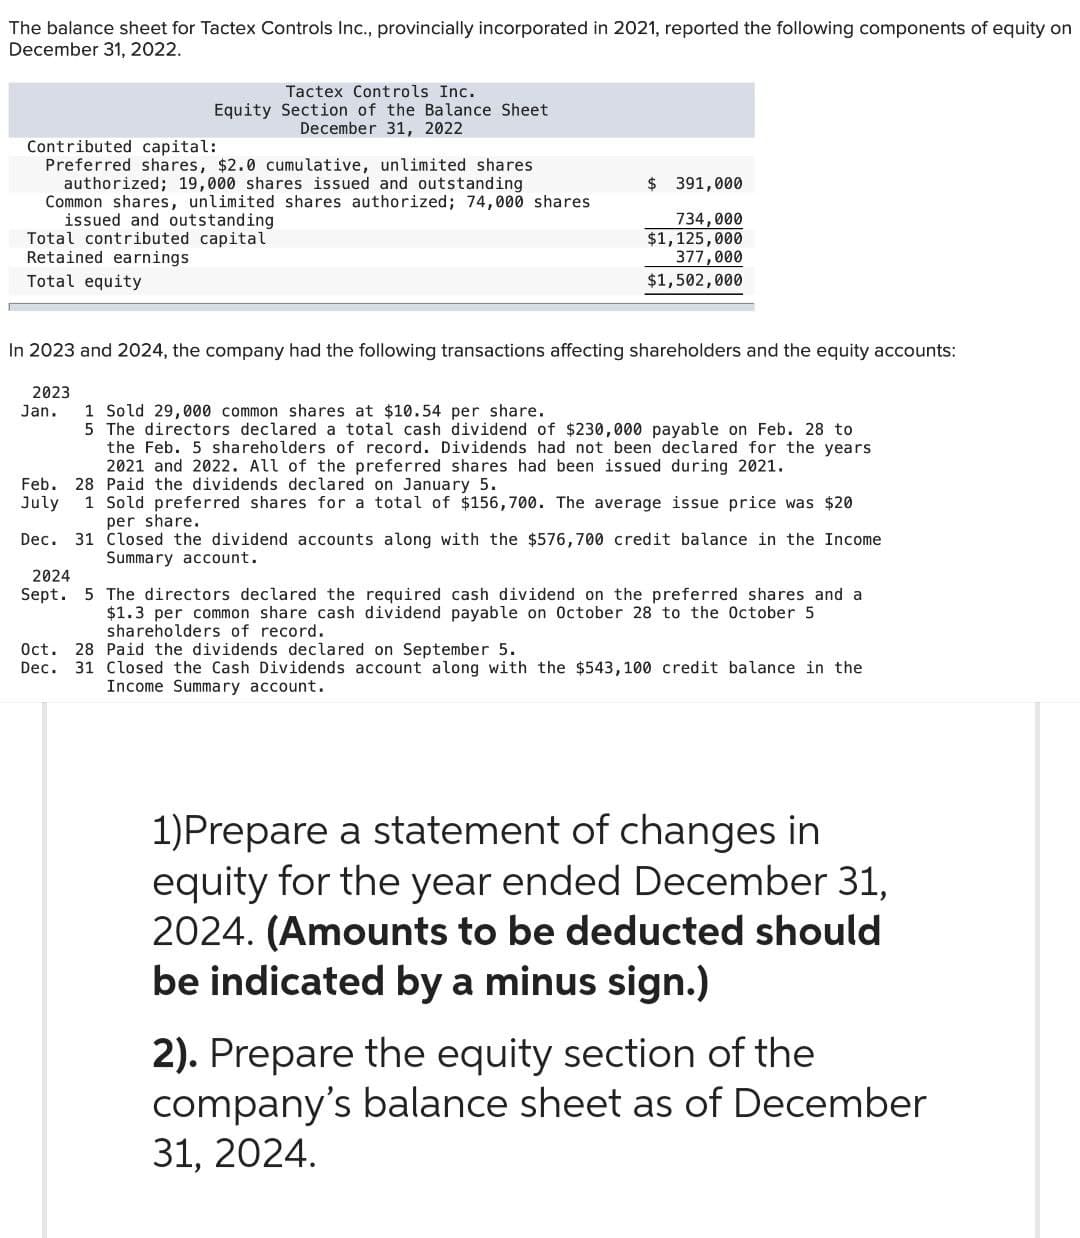 The balance sheet for Tactex Controls Inc., provincially incorporated in 2021, reported the following components of equity on
December 31, 2022.
Contributed capital:
Preferred shares, $2.0 cumulative, unlimited shares
Tactex Controls Inc.
Equity Section of the Balance Sheet
December 31, 2022
authorized; 19,000 shares issued and outstanding
Common shares, unlimited shares authorized; 74,000 shares
issued and outstanding
Total contributed capital
Retained earnings
Total equity
2023
In 2023 and 2024, the company had the following transactions affecting shareholders and the equity accounts:
$ 391,000
734,000
$1,125,000
377,000
$1,502,000
Jan.
1 Sold 29,000 common shares at $10.54 per share.
5 The directors declared a total cash dividend of $230,000 payable on Feb. 28 to
the Feb. 5 shareholders of record. Dividends had not been declared for the years
2021 and 2022. All of the preferred shares had been issued during 2021.
Feb. 28 Paid the dividends declared on January 5.
July 1 Sold preferred shares for a total of $156,700. The average issue price was $20
per share.
Dec. 31 Closed the dividend accounts along with the $576,700 credit balance in the Income
Summary account.
2024
Sept. 5 The directors declared the required cash dividend on the preferred shares and a
$1.3 per common share cash dividend payable on October 28 to the October 5
shareholders of record.
Oct. 28 Paid the dividends declared on September 5.
Dec. 31 Closed the Cash Dividends account along with the $543,100 credit balance in the
Income Summary account.
1)Prepare a statement of changes in
equity for the year ended December 31,
2024. (Amounts to be deducted should
be indicated by a minus sign.)
2). Prepare the equity section of the
company's balance sheet as of December
31, 2024.